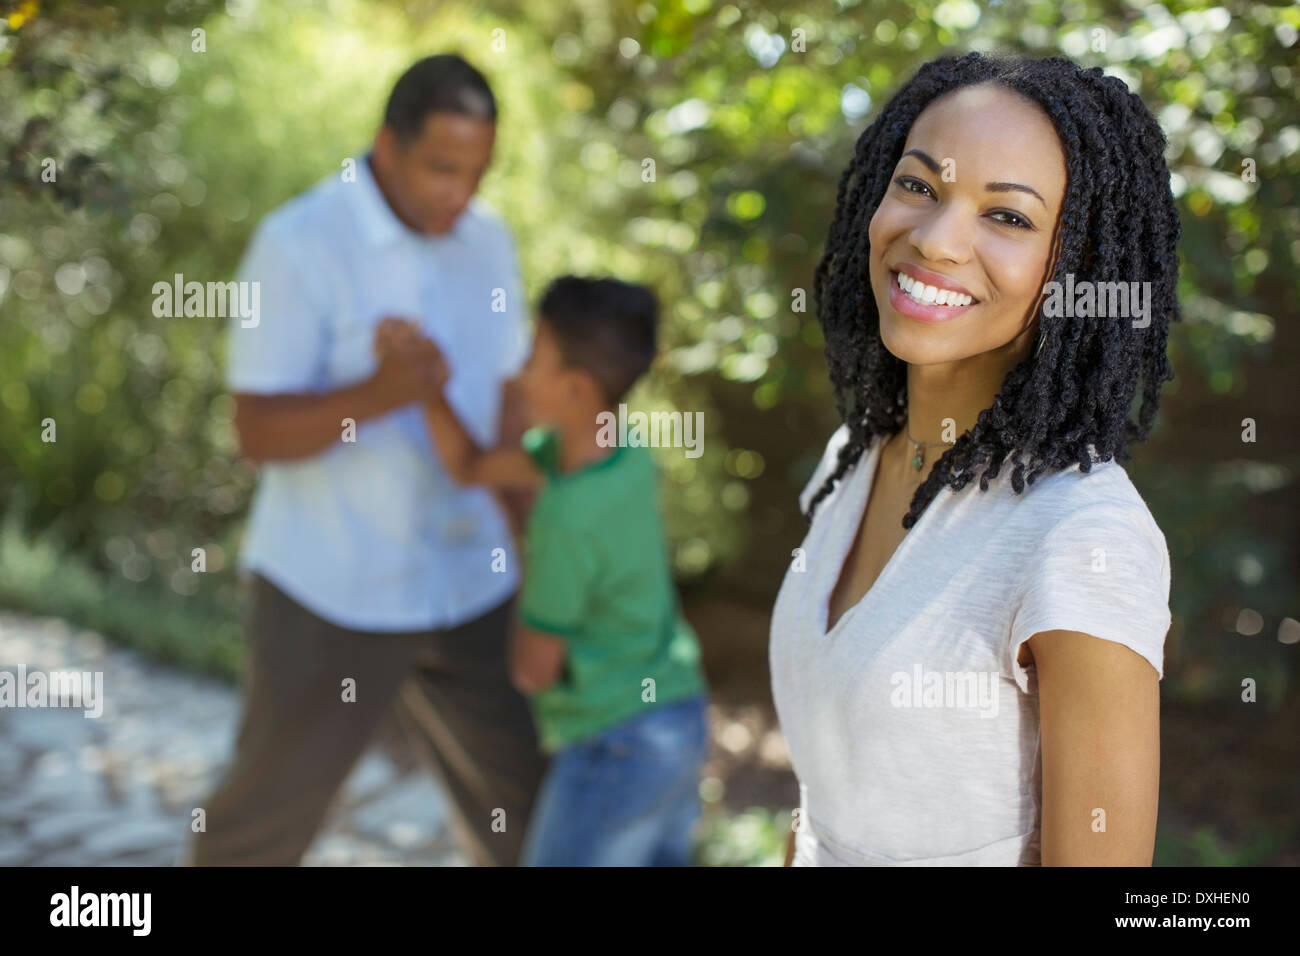 Portrait of smiling woman outdoors Stock Photo